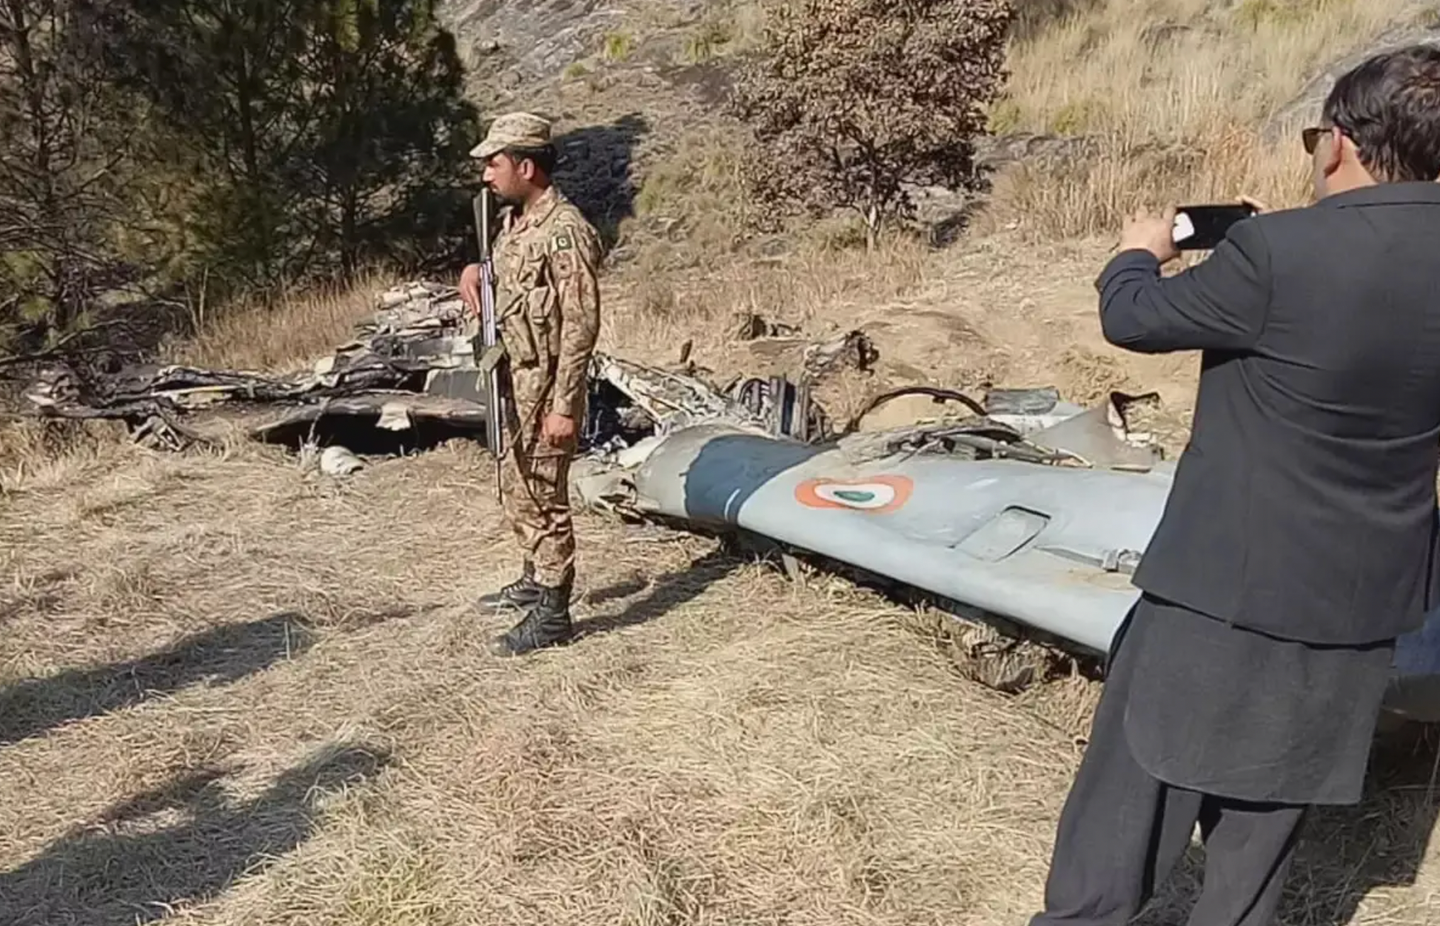 Part of the wreckage of the MiG-21 Bison, flown by Wing Commander Abhinandan Varthaman, shot down during the Balakot confrontation in 2019.&nbsp;<em>AP Photo/Abdul Razzaq</em>